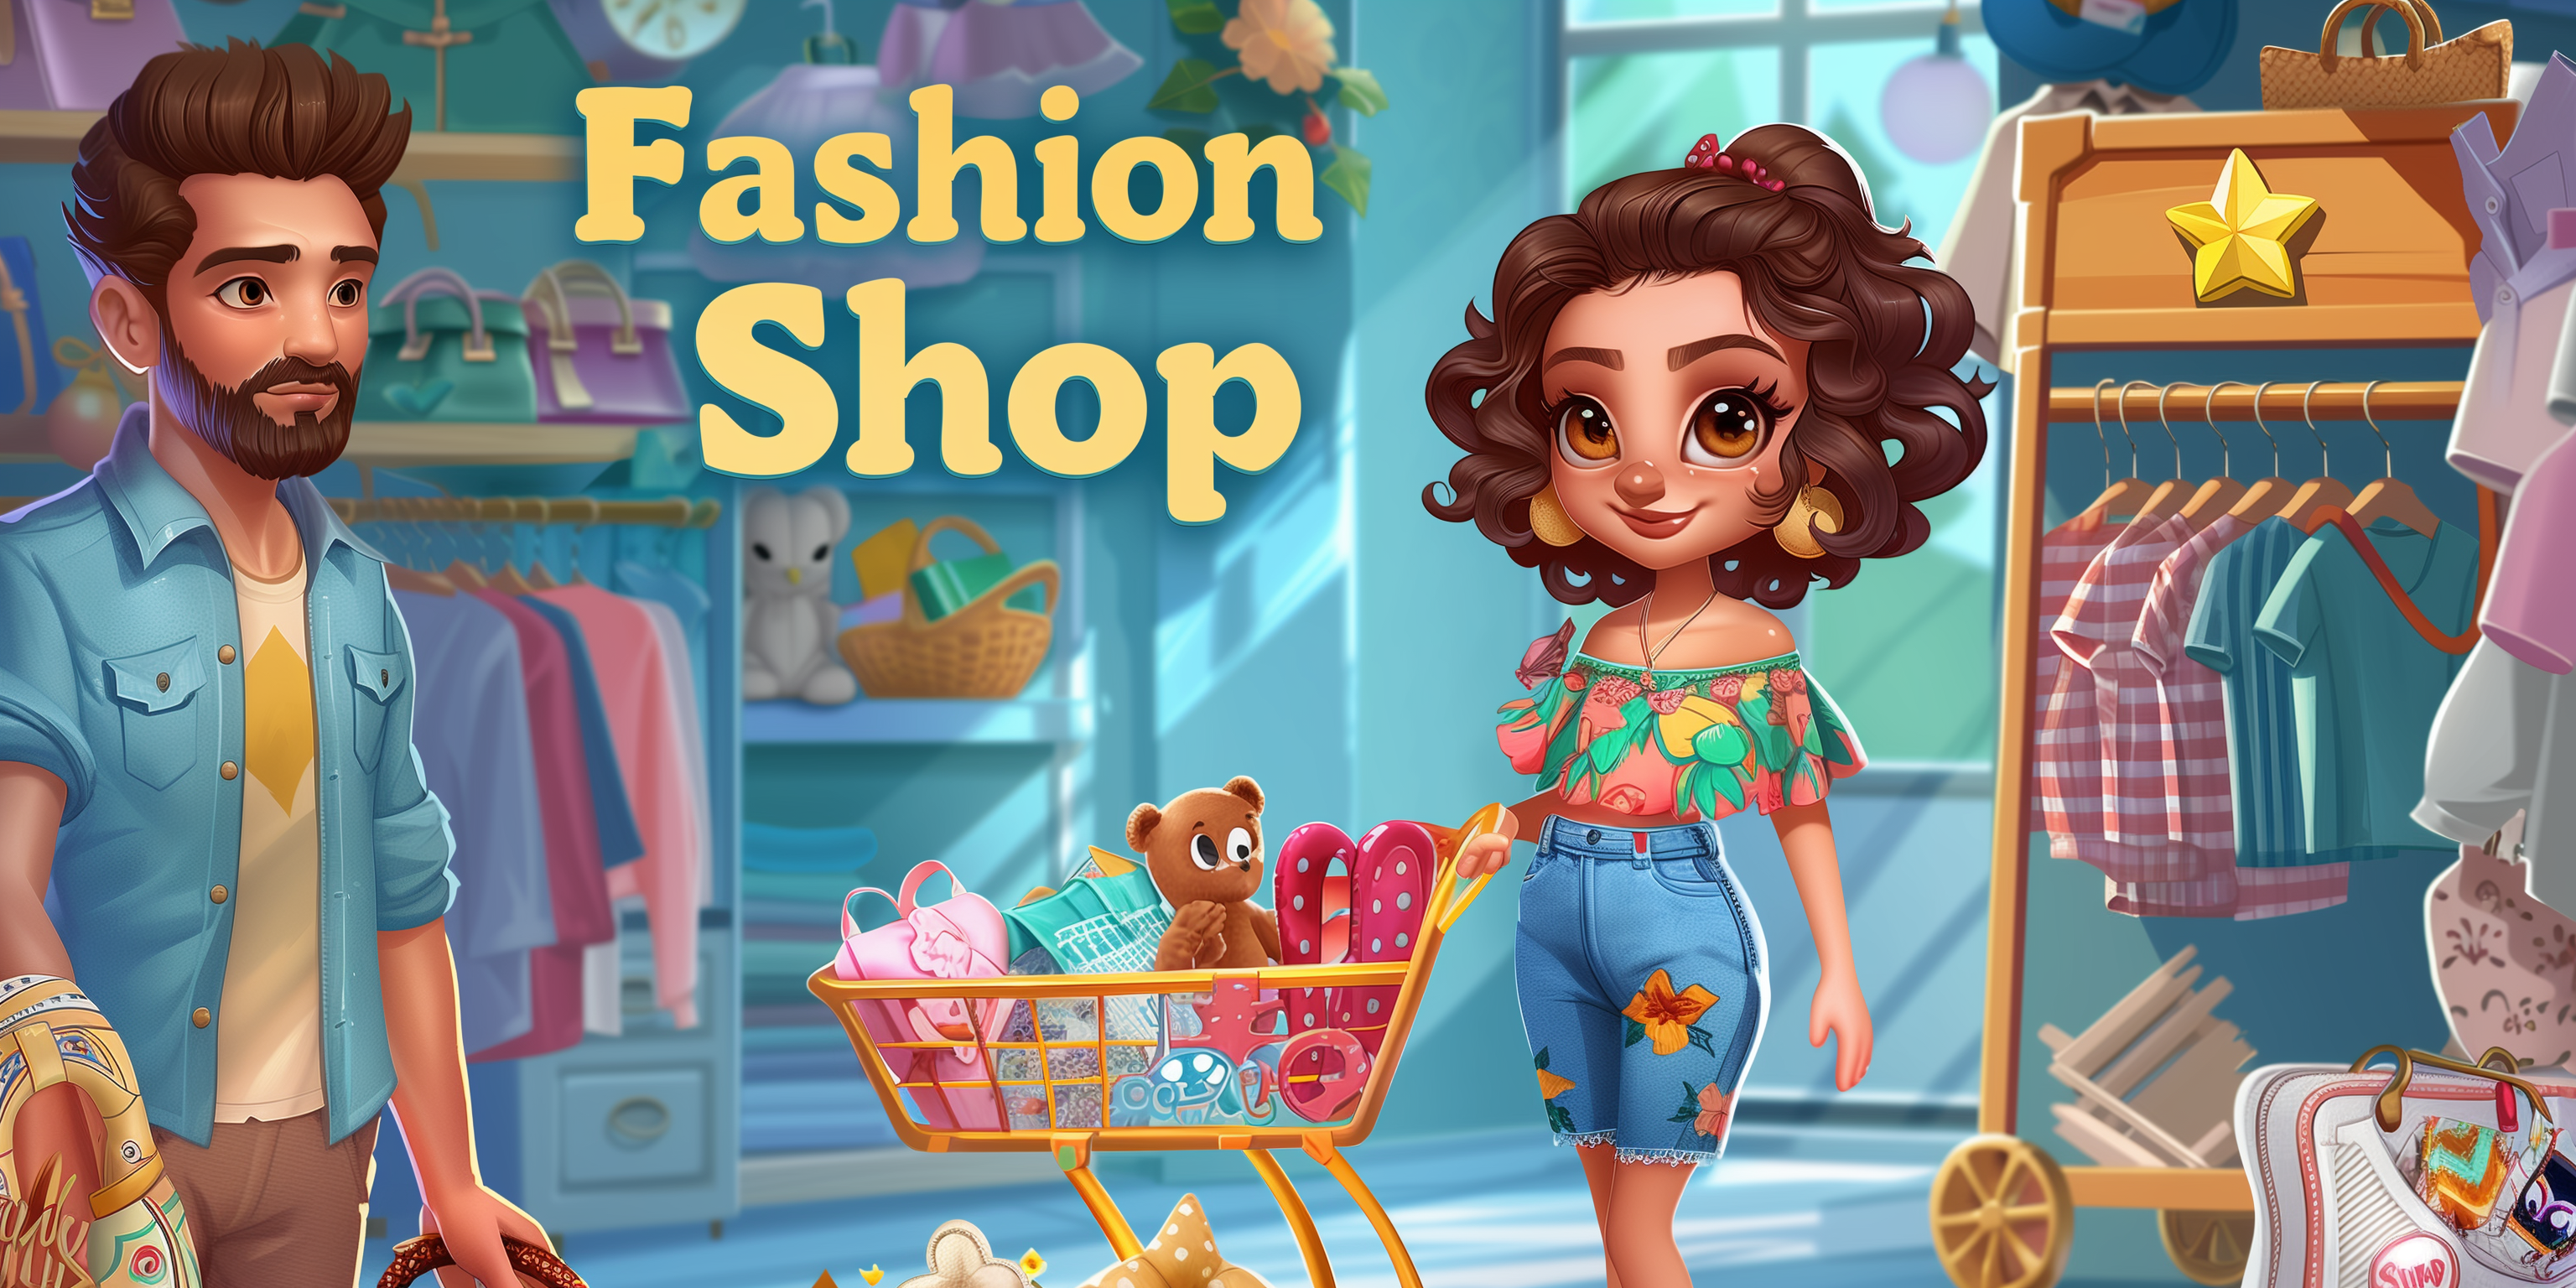 Screenshot 1 of Fashion Shop Tycoon－Style Game 1.10.8